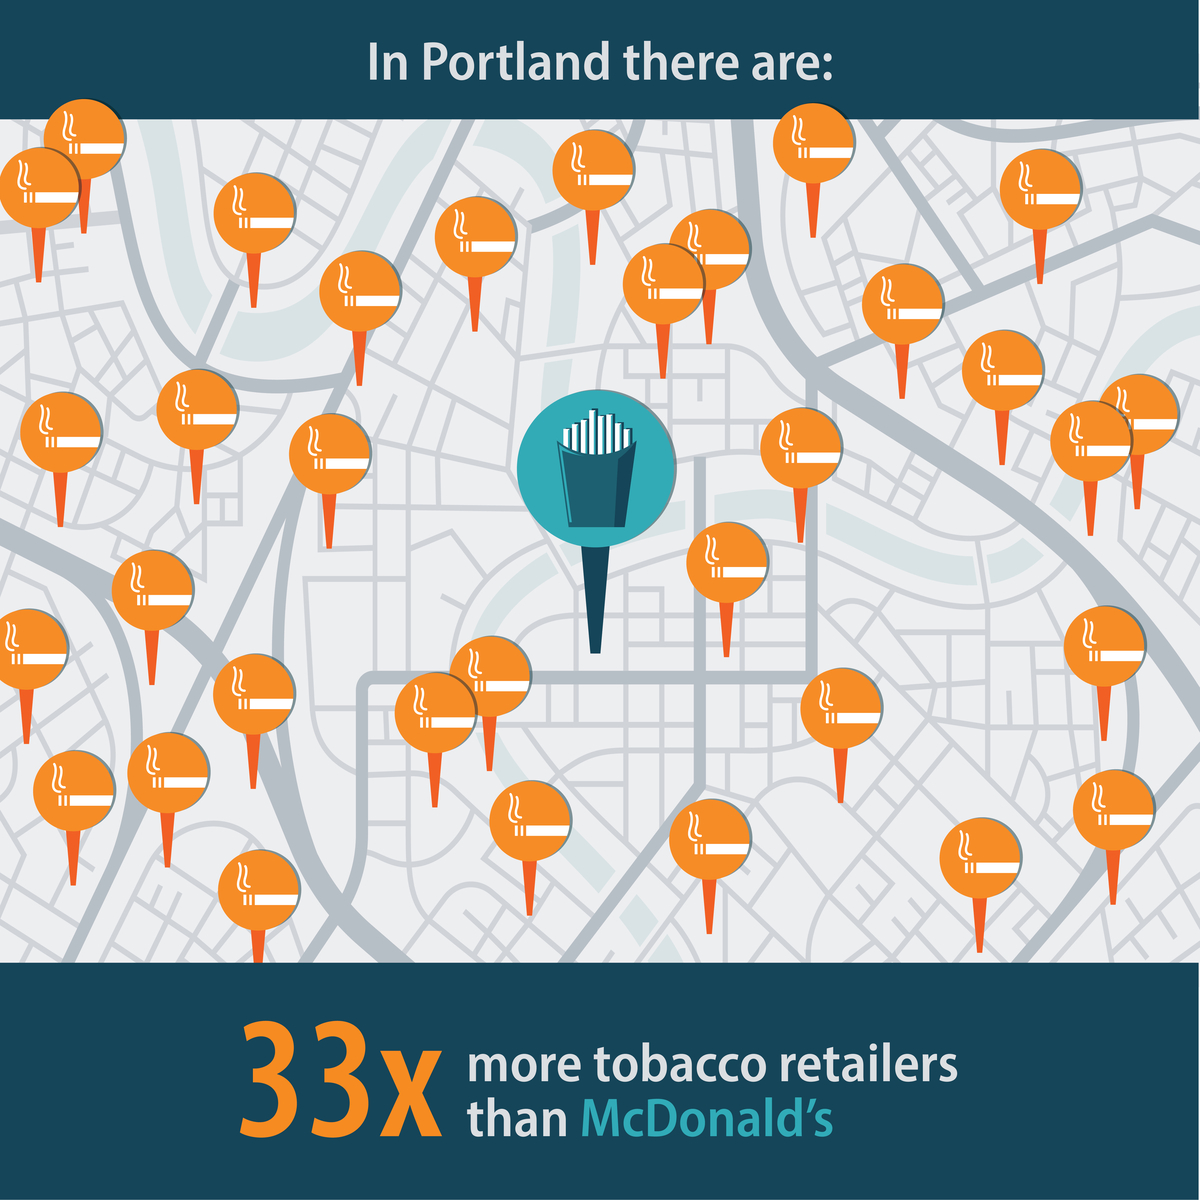 In Portland there are: 33 times more tobacco retailers than McDonald's